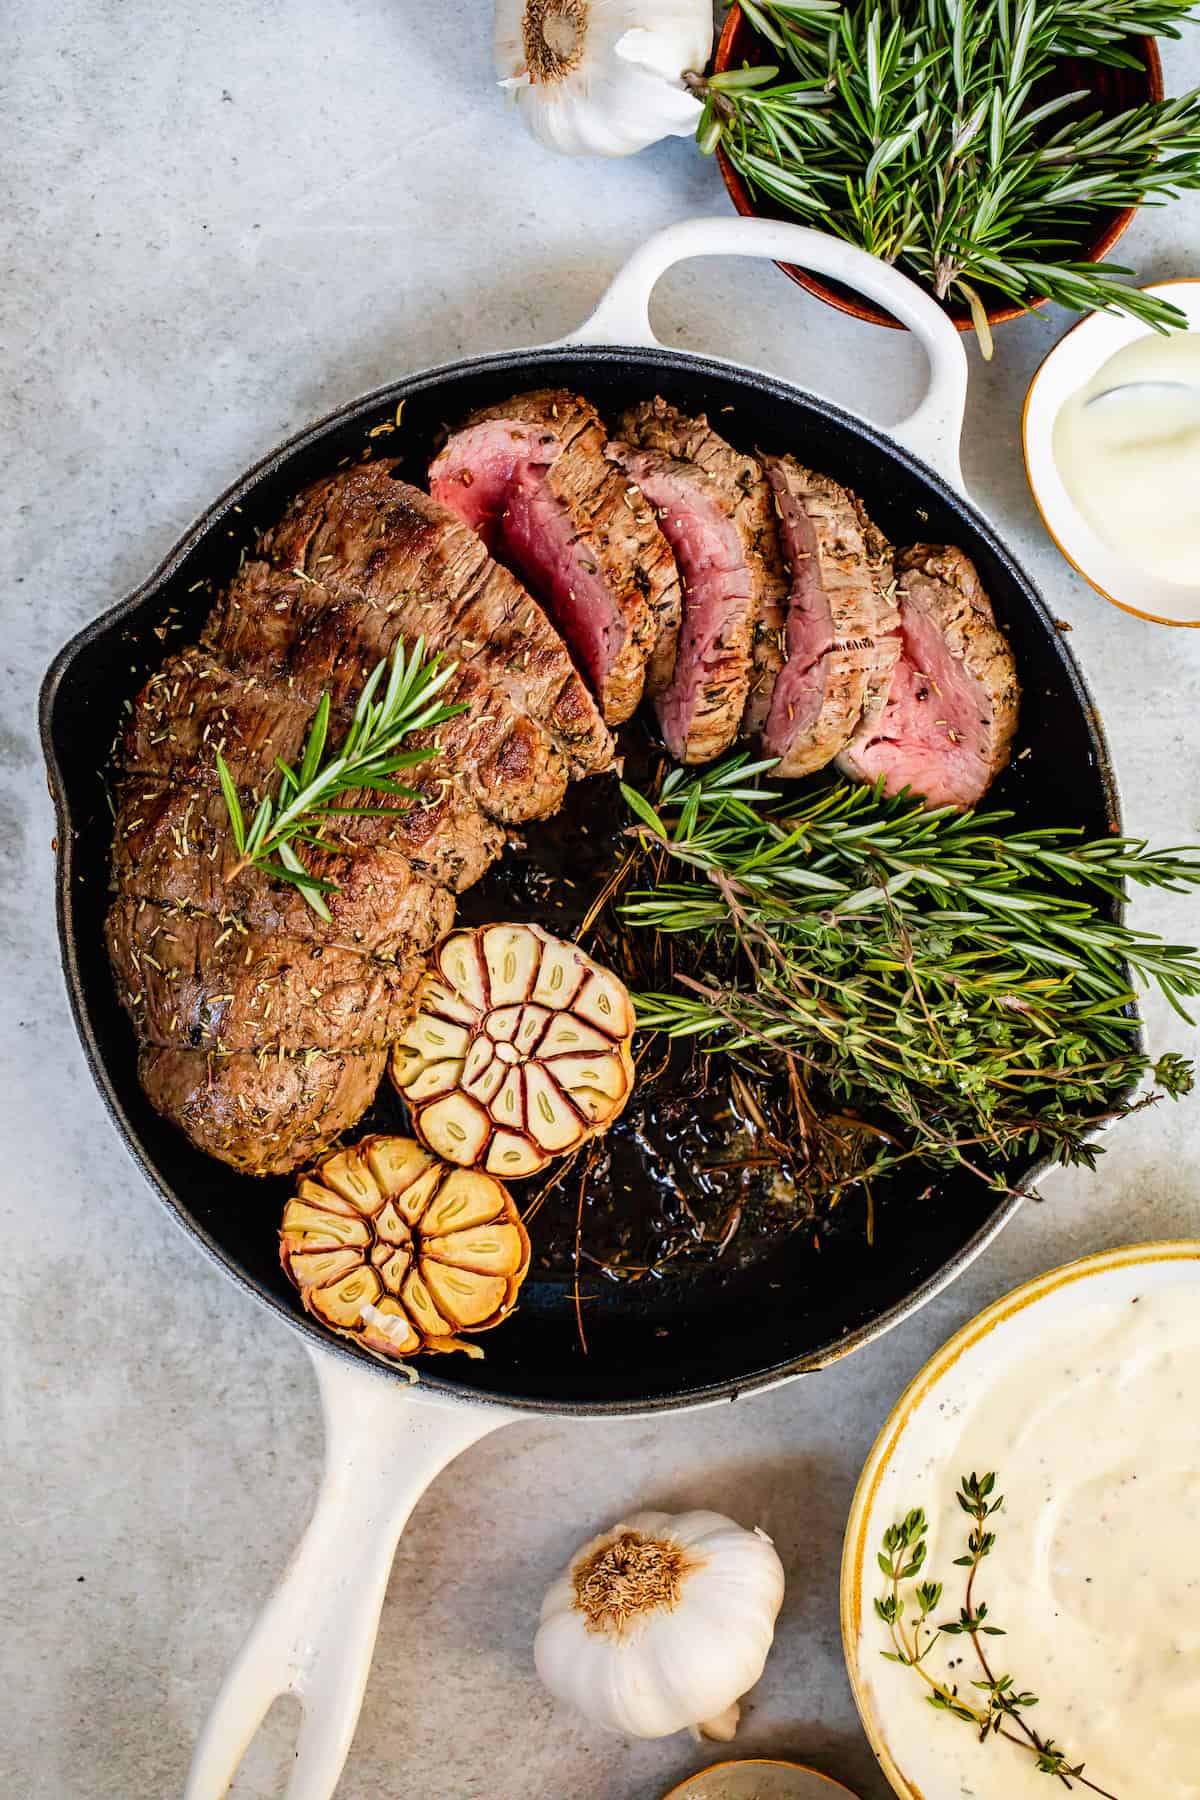 A White Skillet Containing the Cooked Beef and its Garnishes